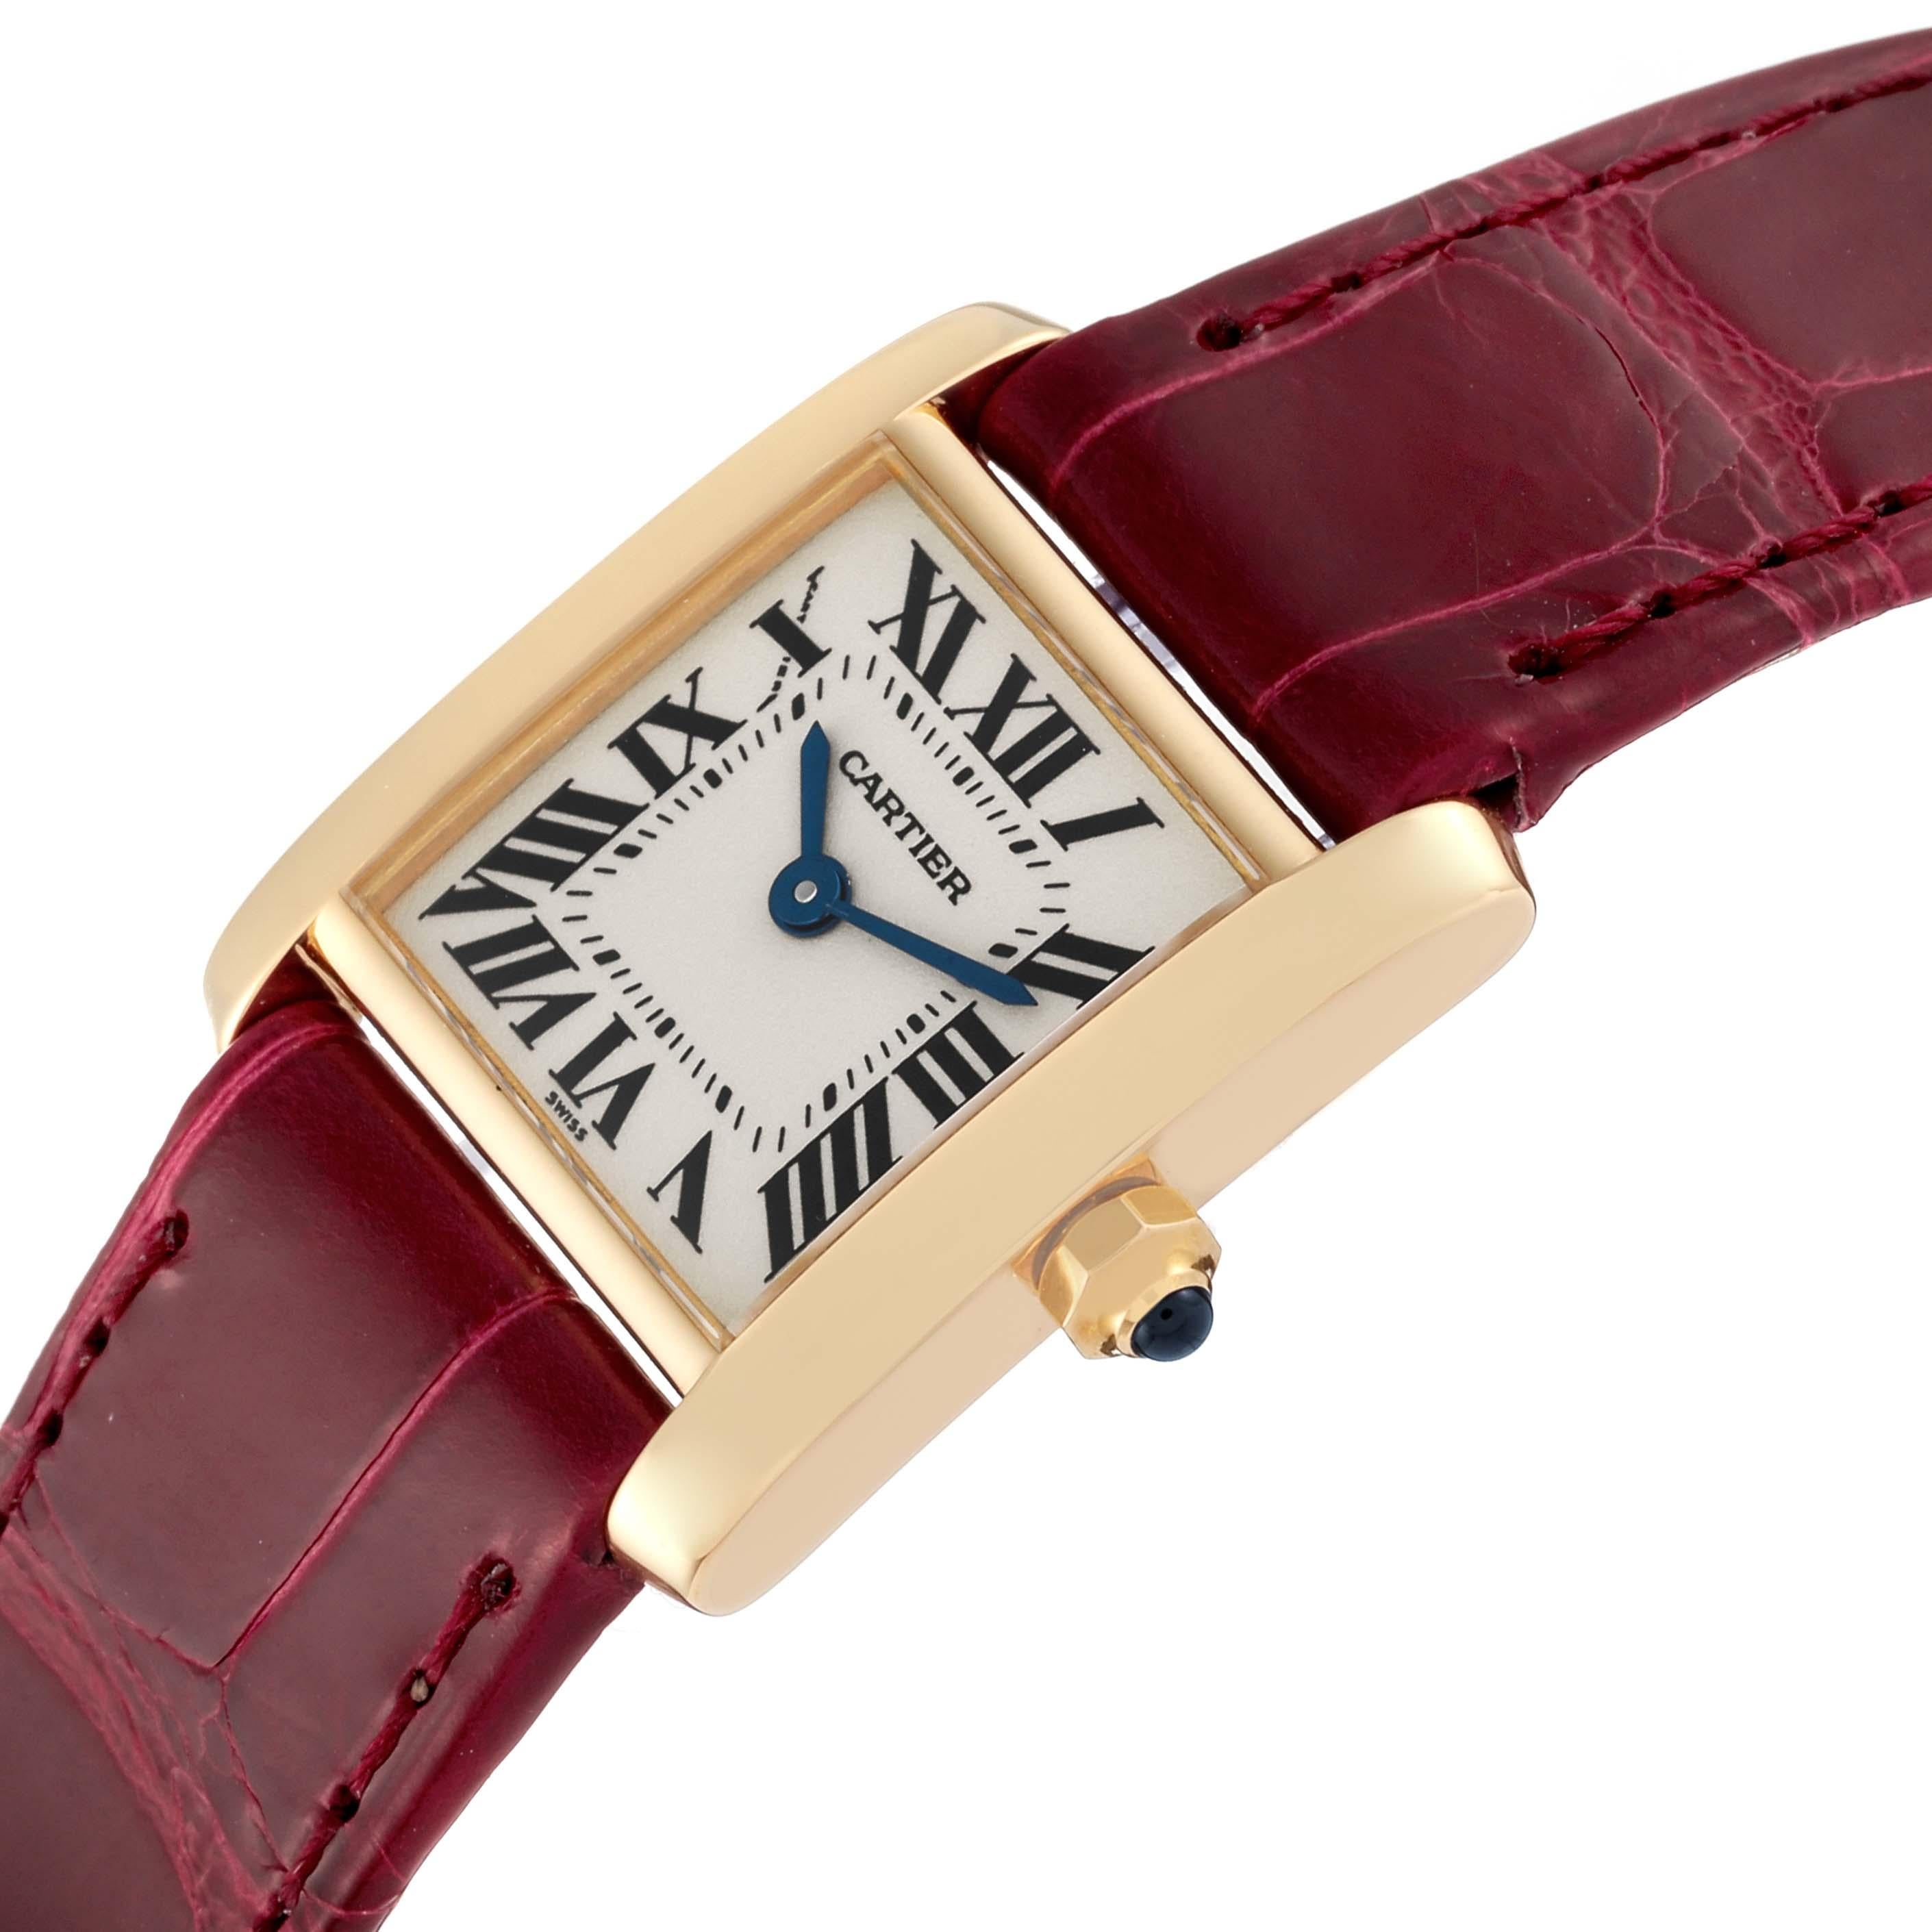 Cartier Tank Francaise Yellow Gold Burgundy Strap Ladies Watch W5000256. Quartz movement. 18K yellow gold rectangular case 20.0 x 25.0 mm case. Octagonal crown set with a blue sapphire cabochon. . Scratch resistant sapphire crystal. Silver dial with